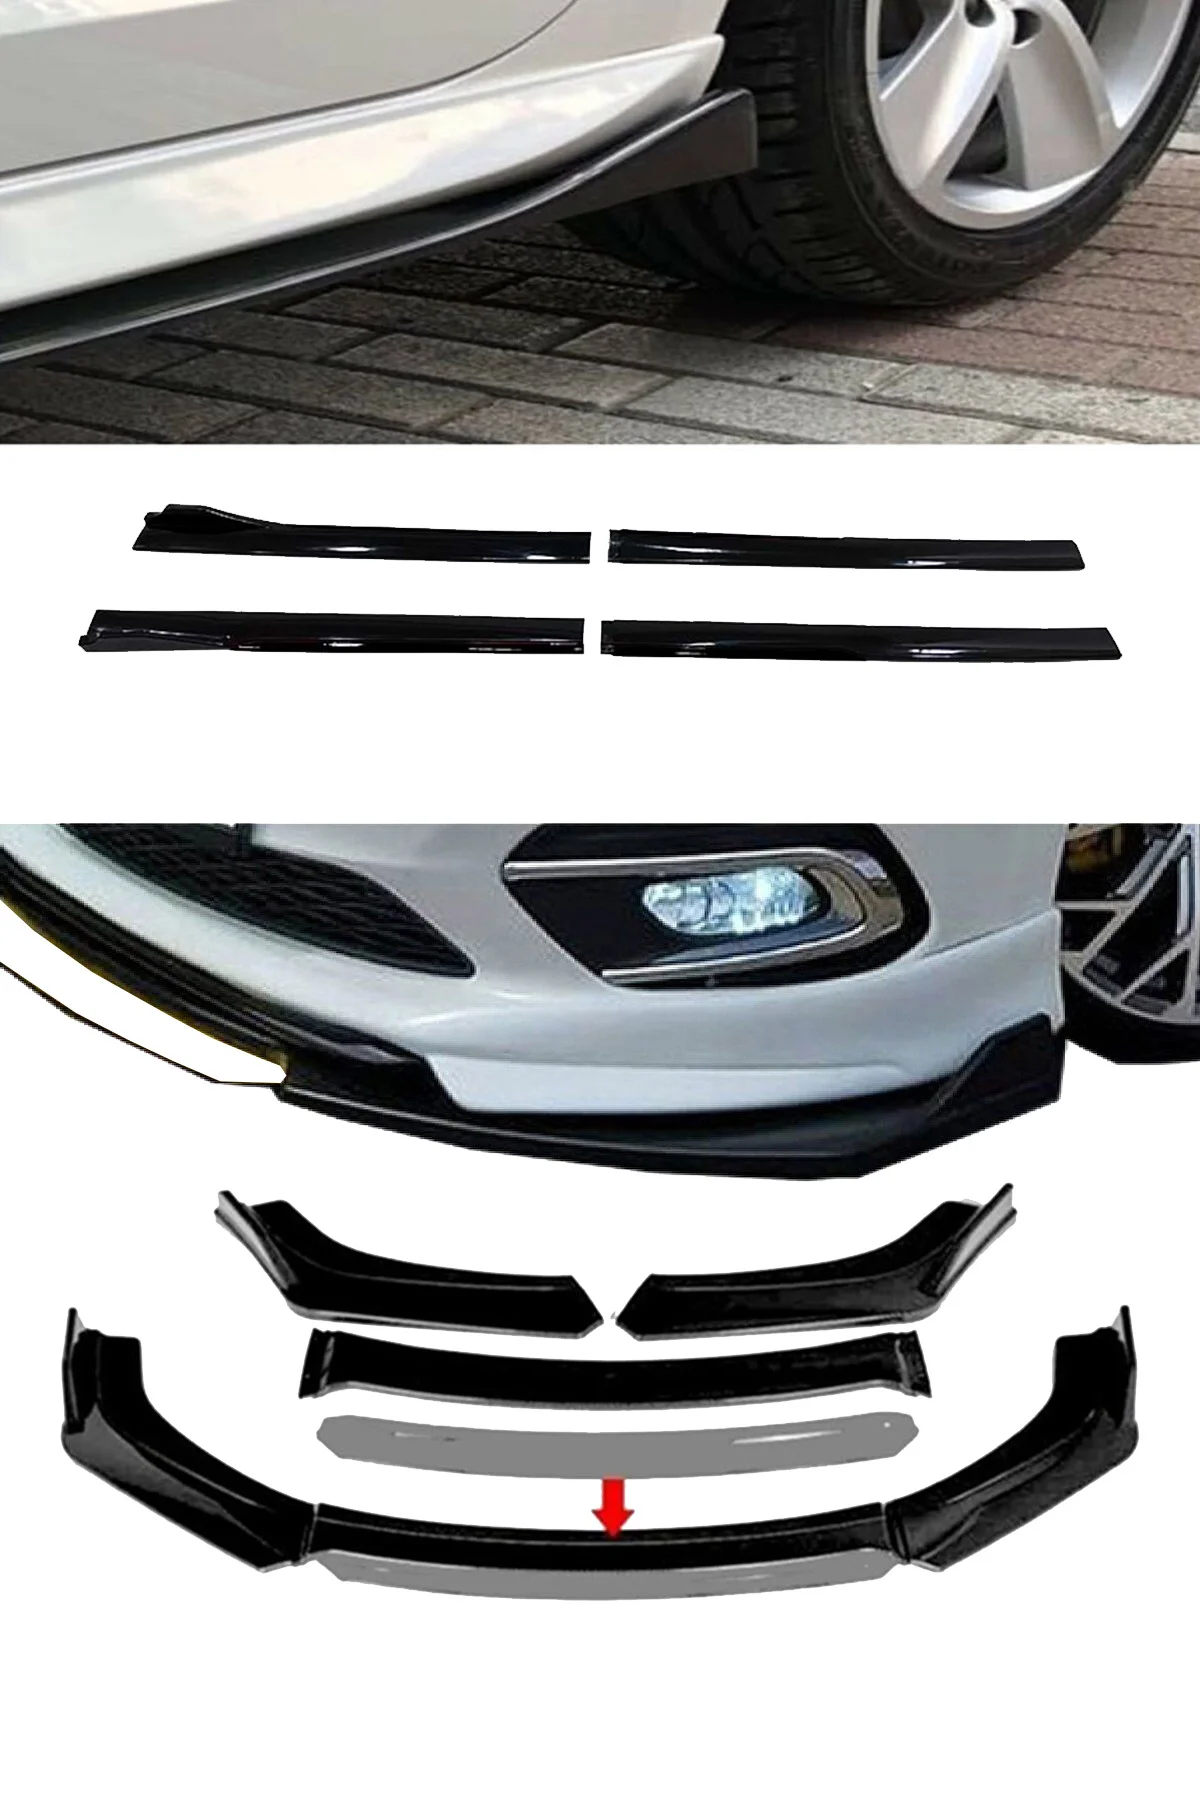 

Hyundai Accent Blue 2011 post flapy side sill 4 piece white front additional Piano Black Set